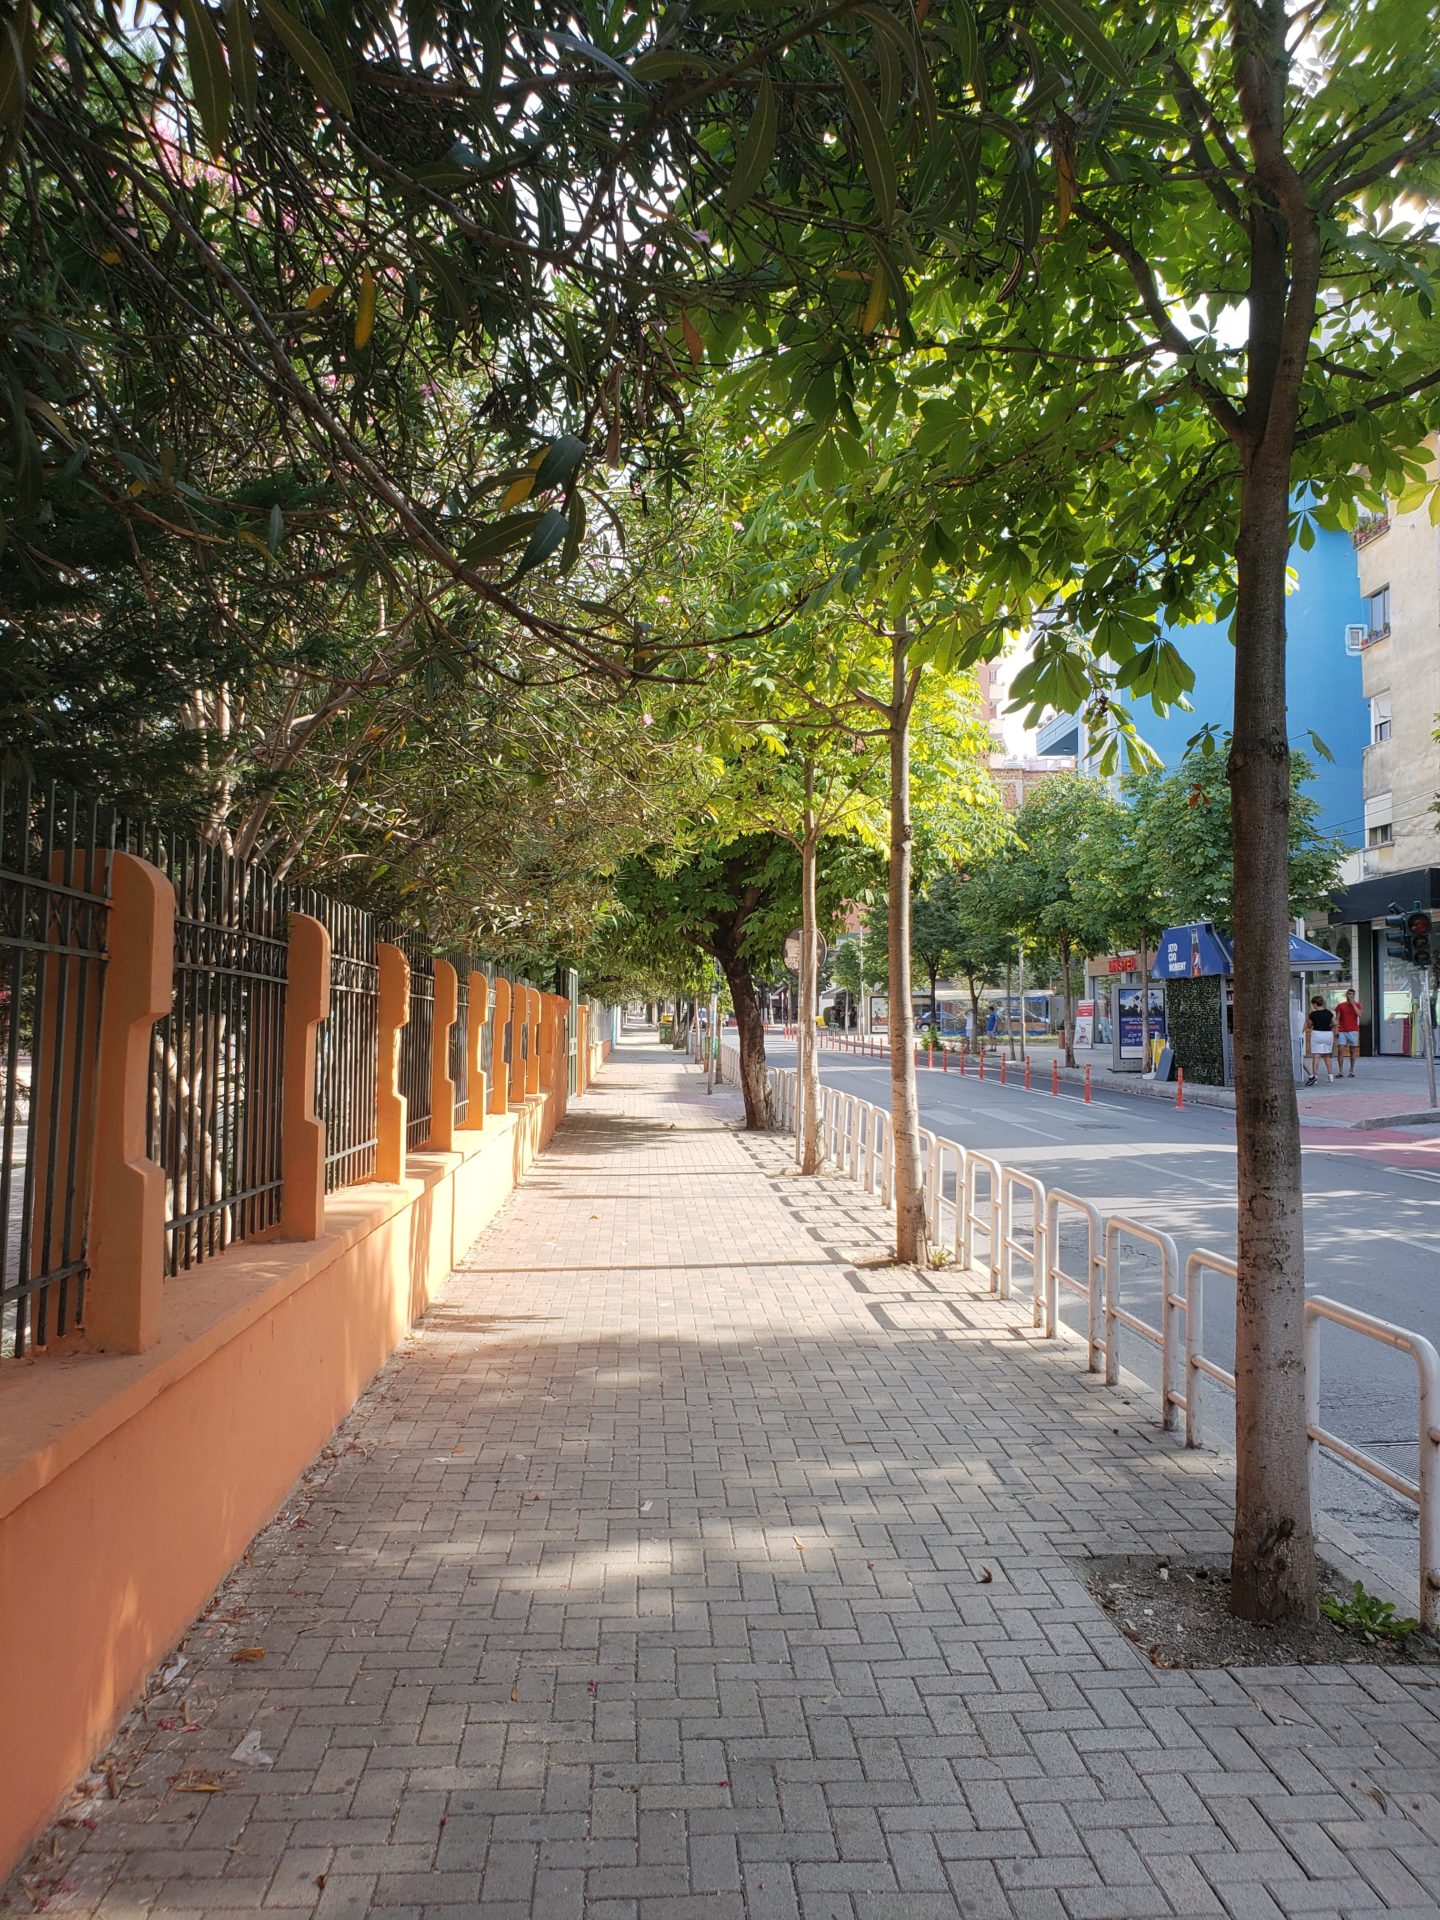 a sidewalk with trees and a fence